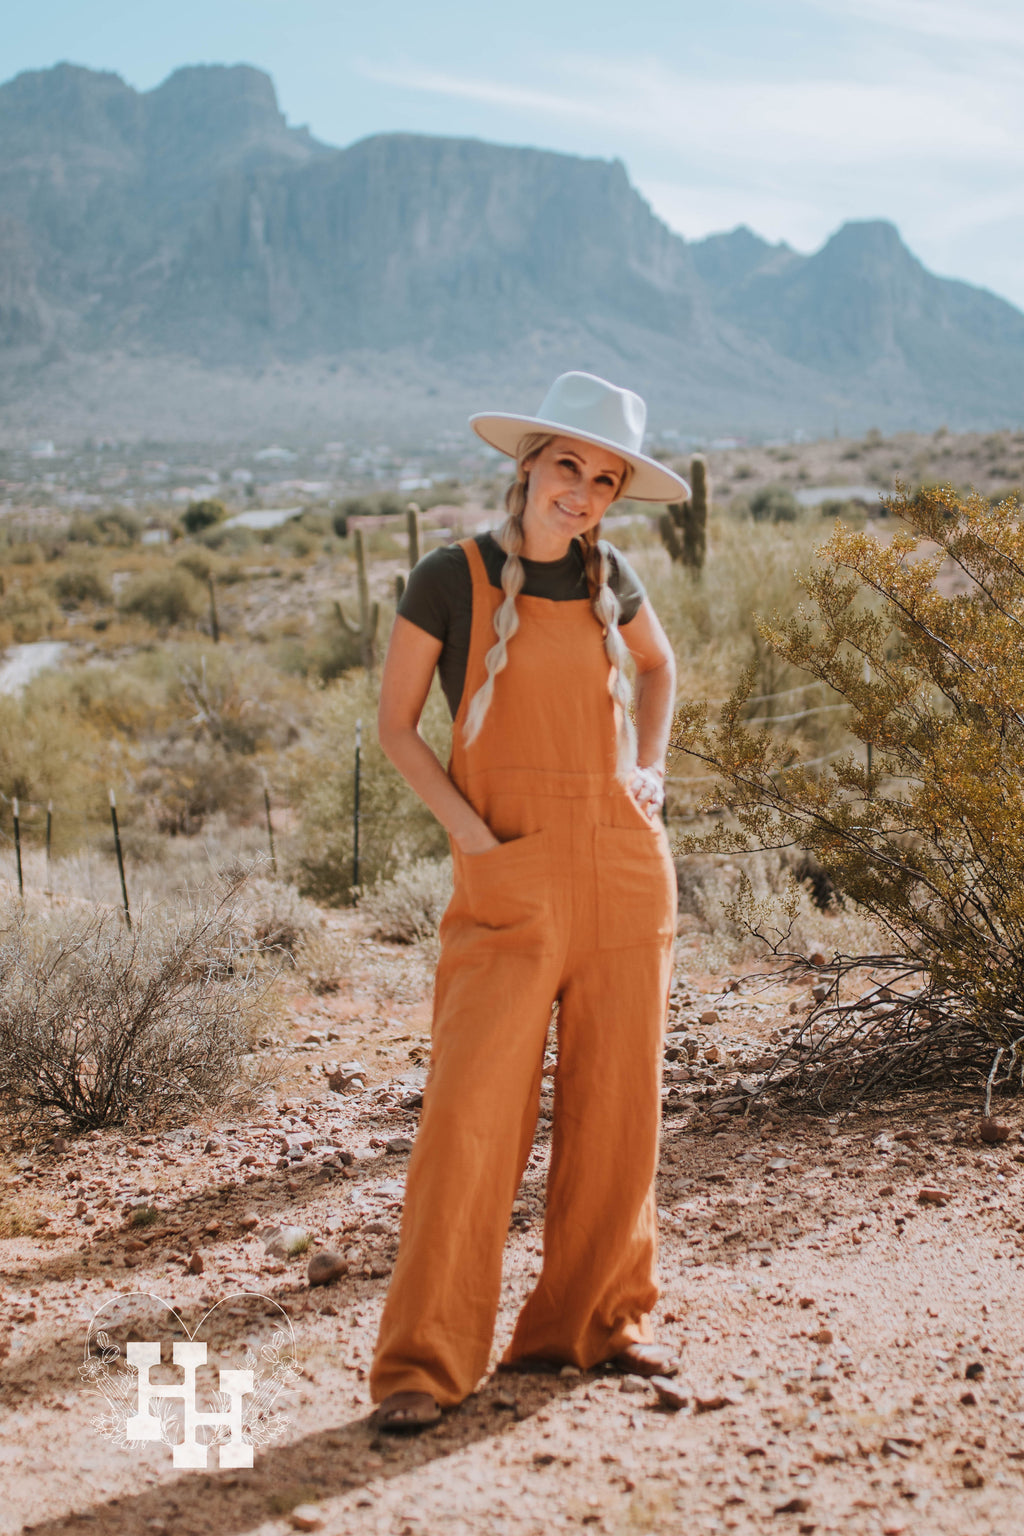 Girl standing infront of supersition mountain wearing orange linen loose fistting overalls, with  a dark green tight tshirt and light mint green wide brim hat.